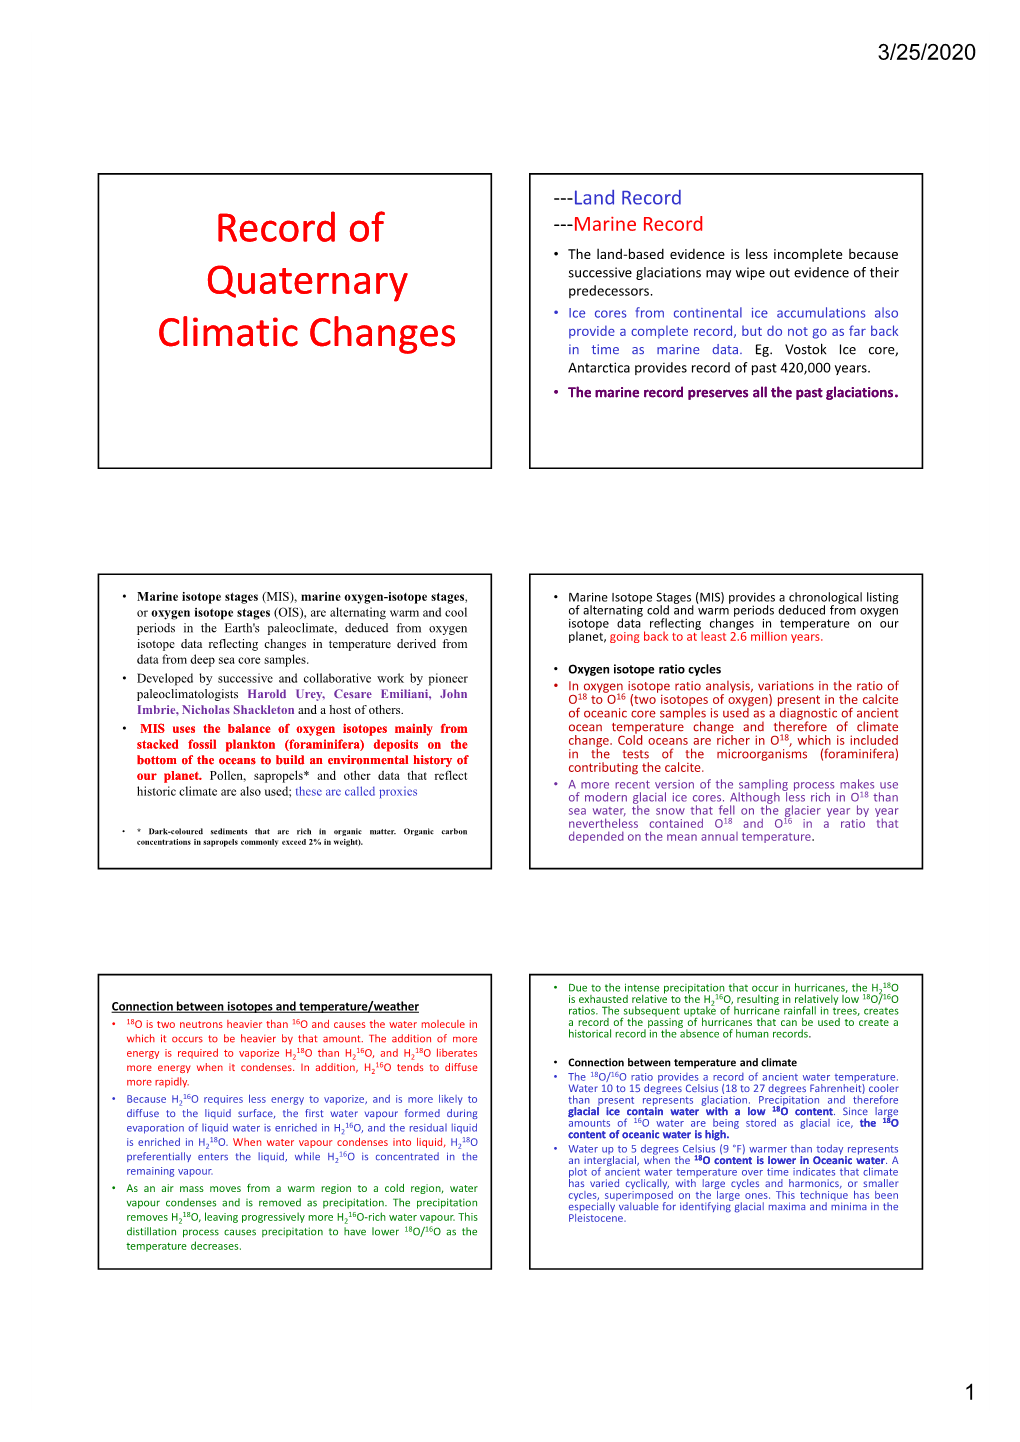 Record of Quaternary Climatic Changes